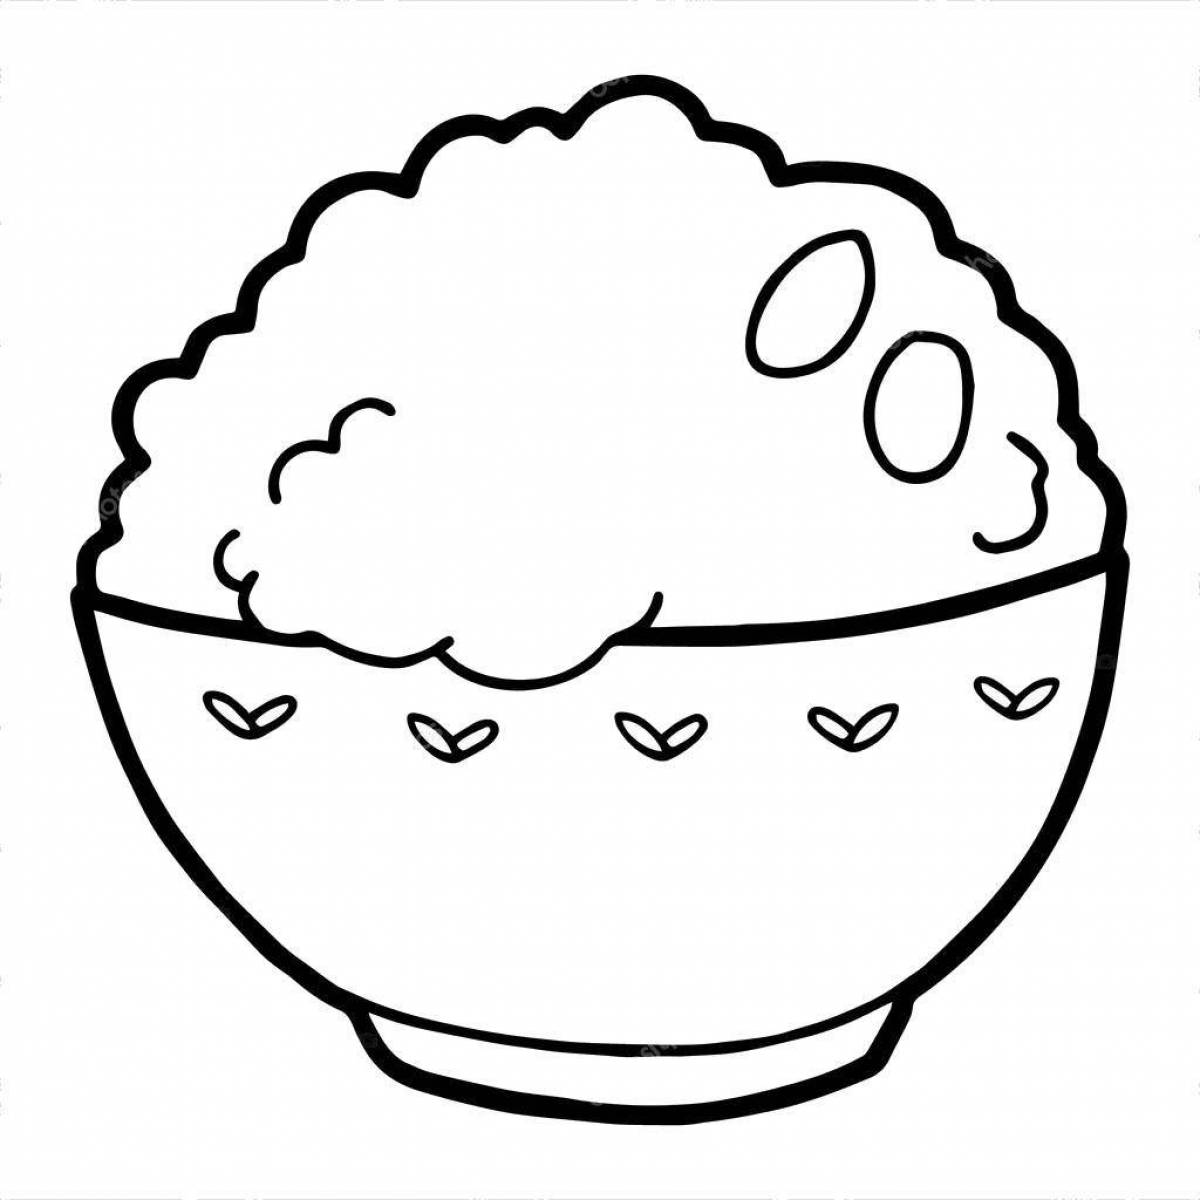 Coloring page sparkling cottage cheese